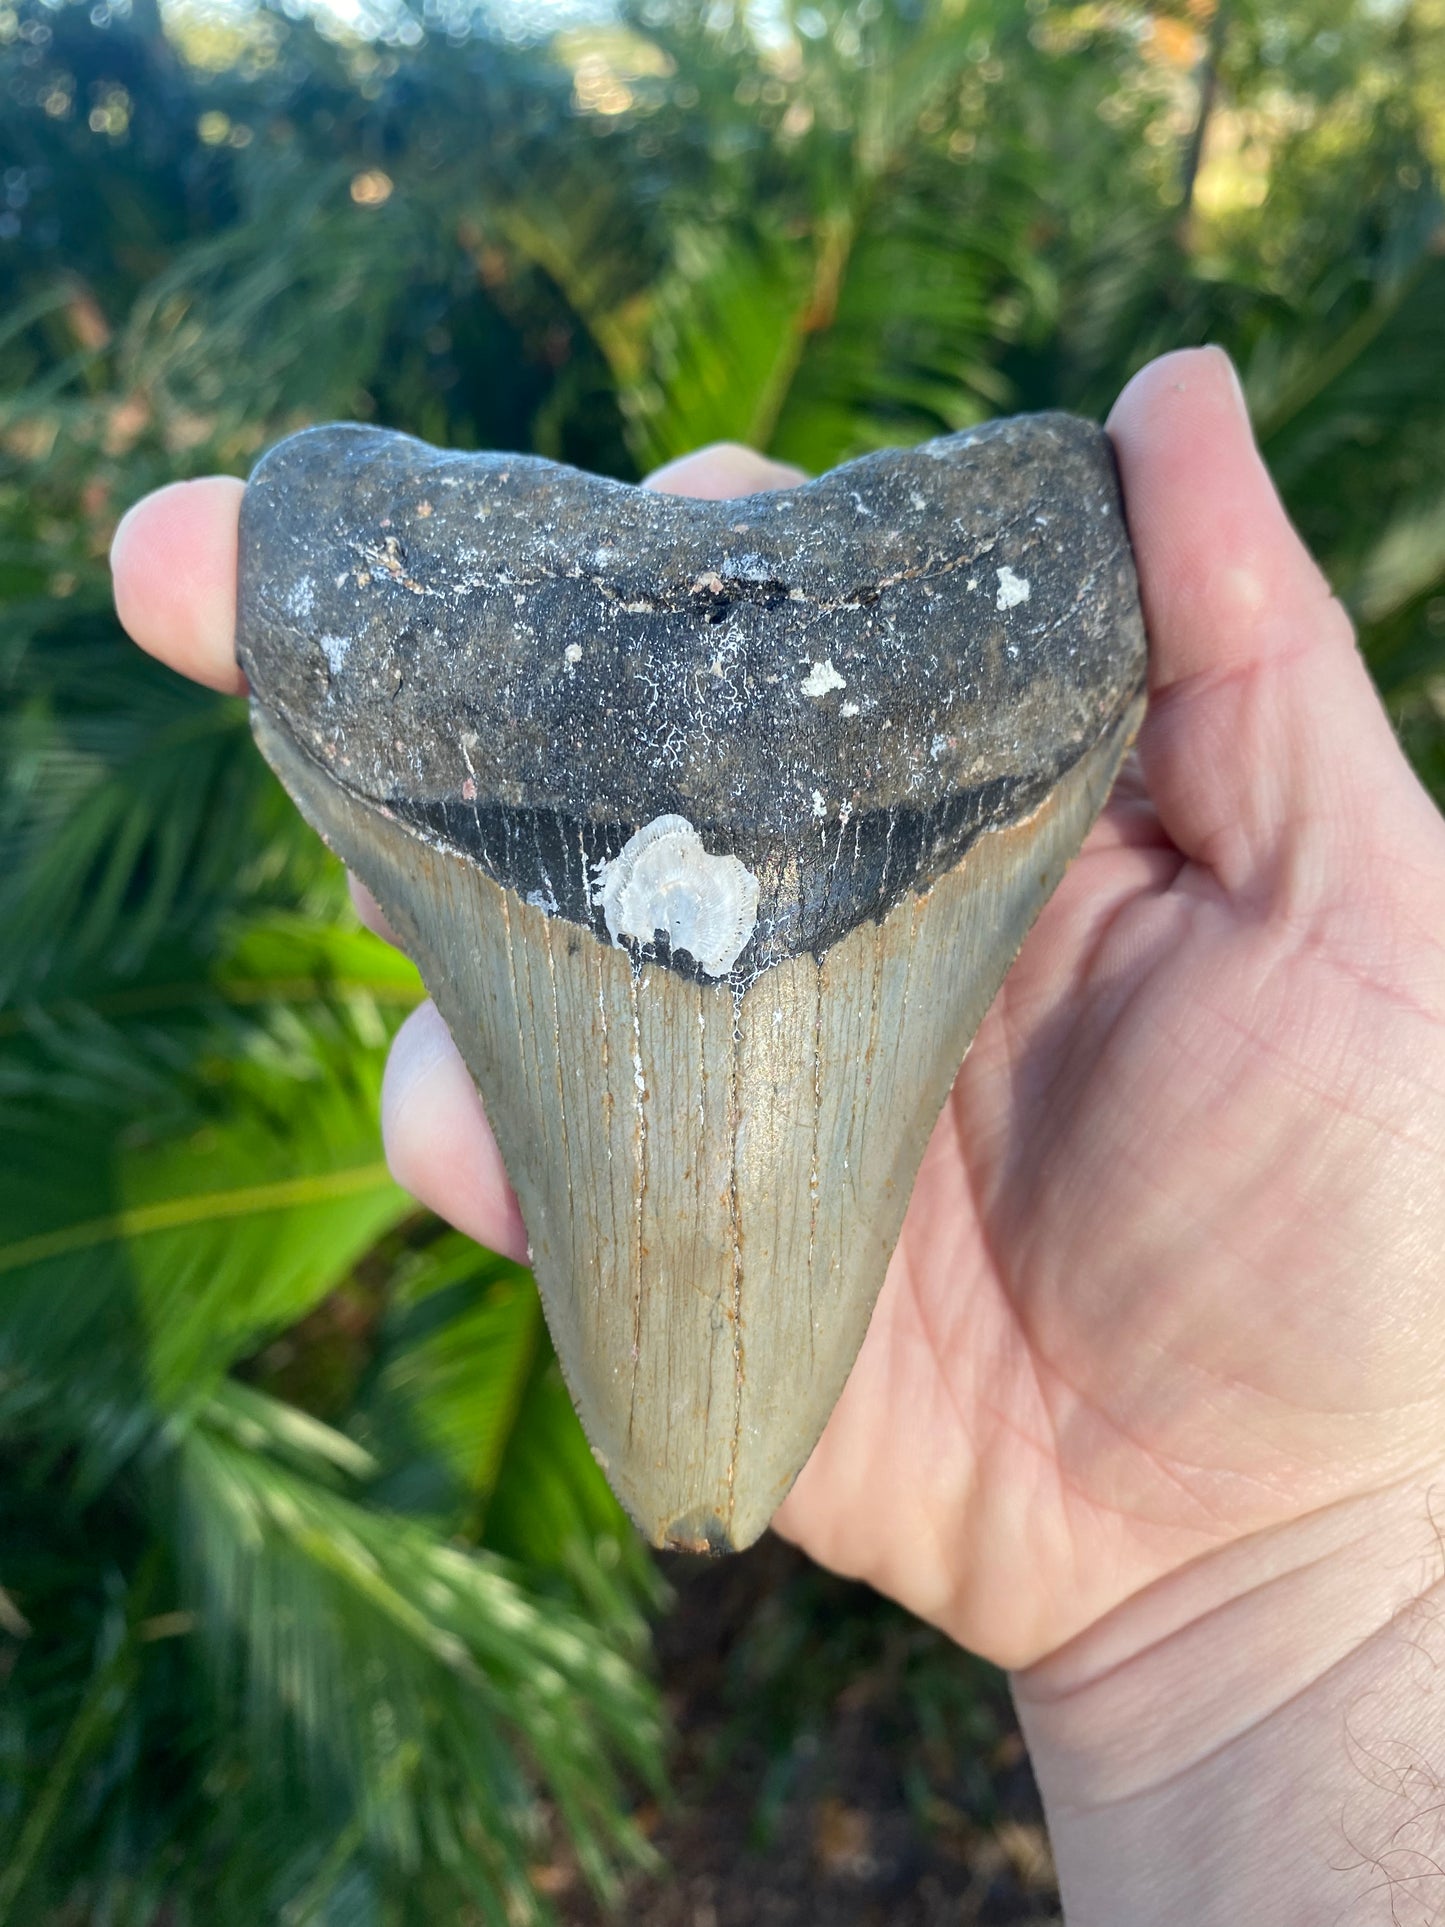 4.44 Inch Prehistoric Megalodon Sharks Tooth Fossil